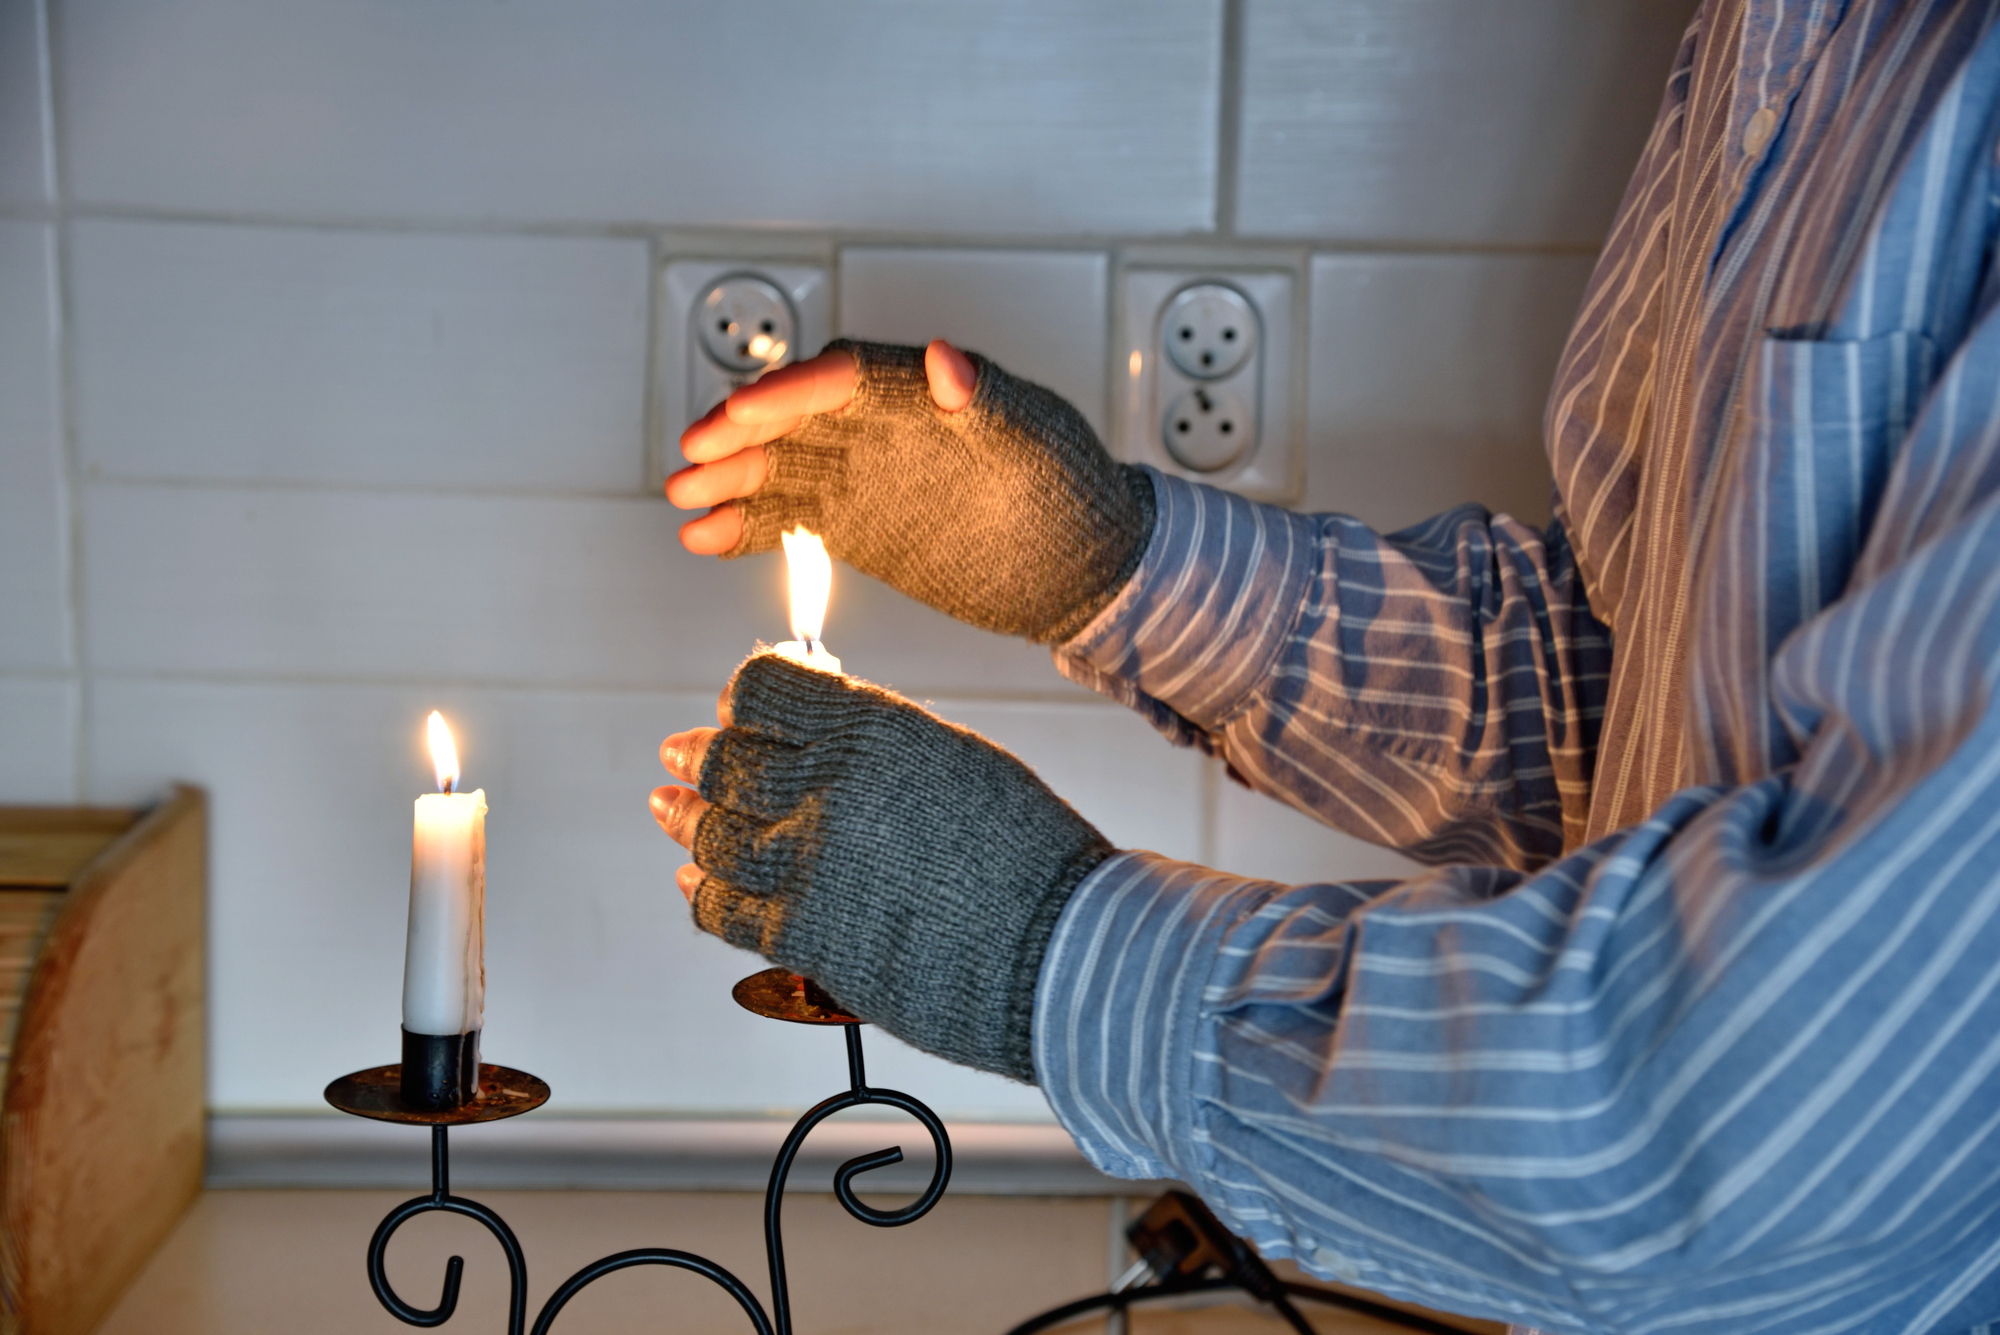 Symbols of poverty: man at home without electricity, without heating. Using candles to warm up.